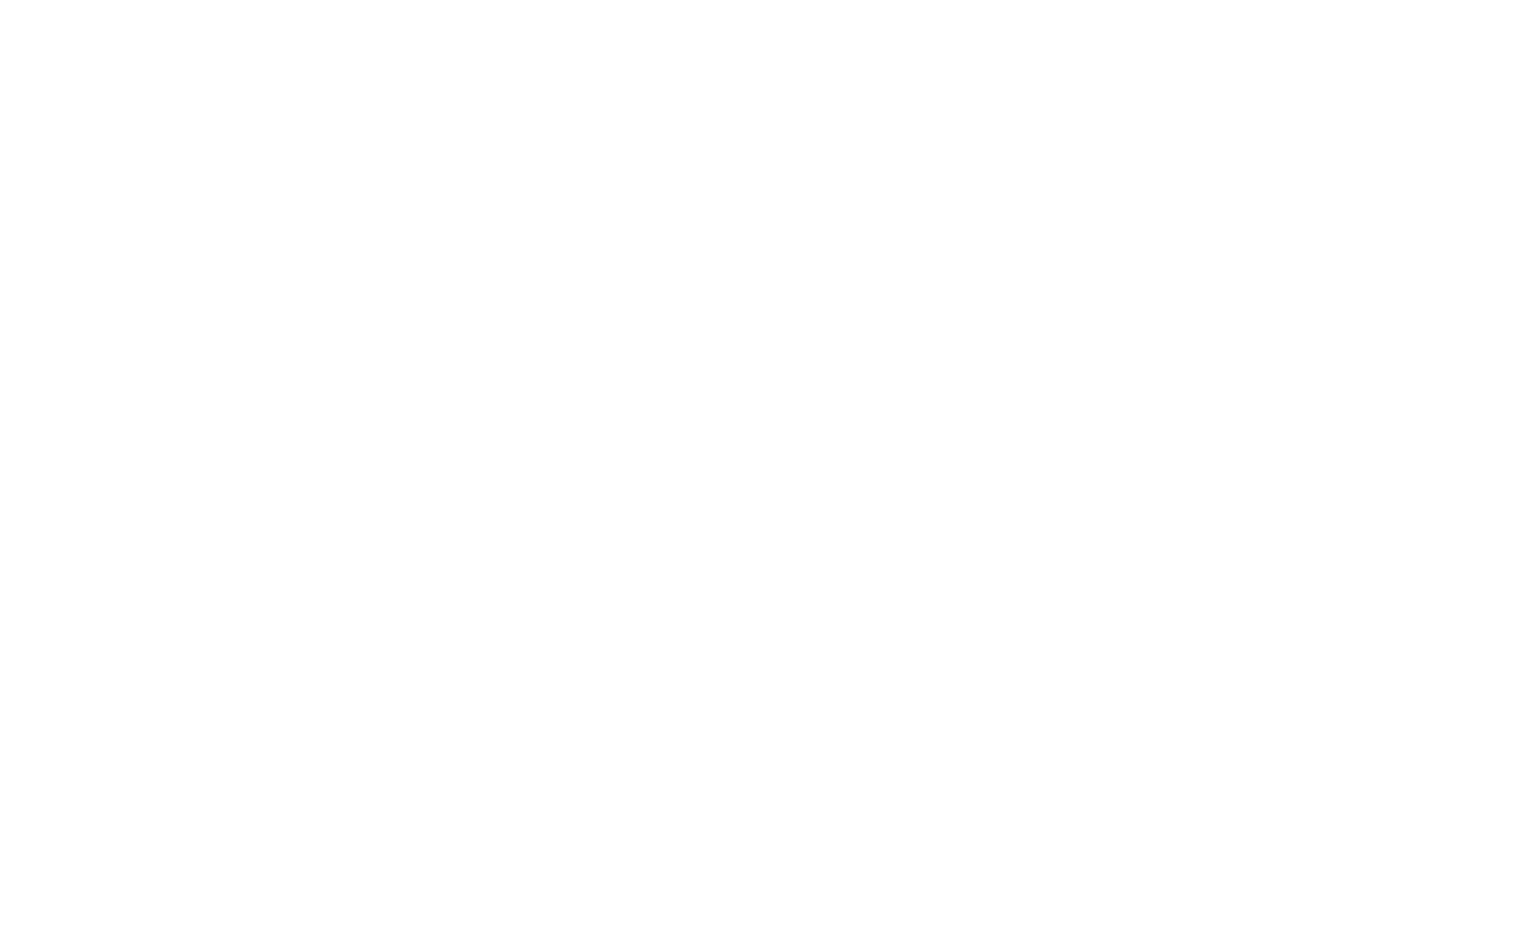 The Butcher's Wife logo